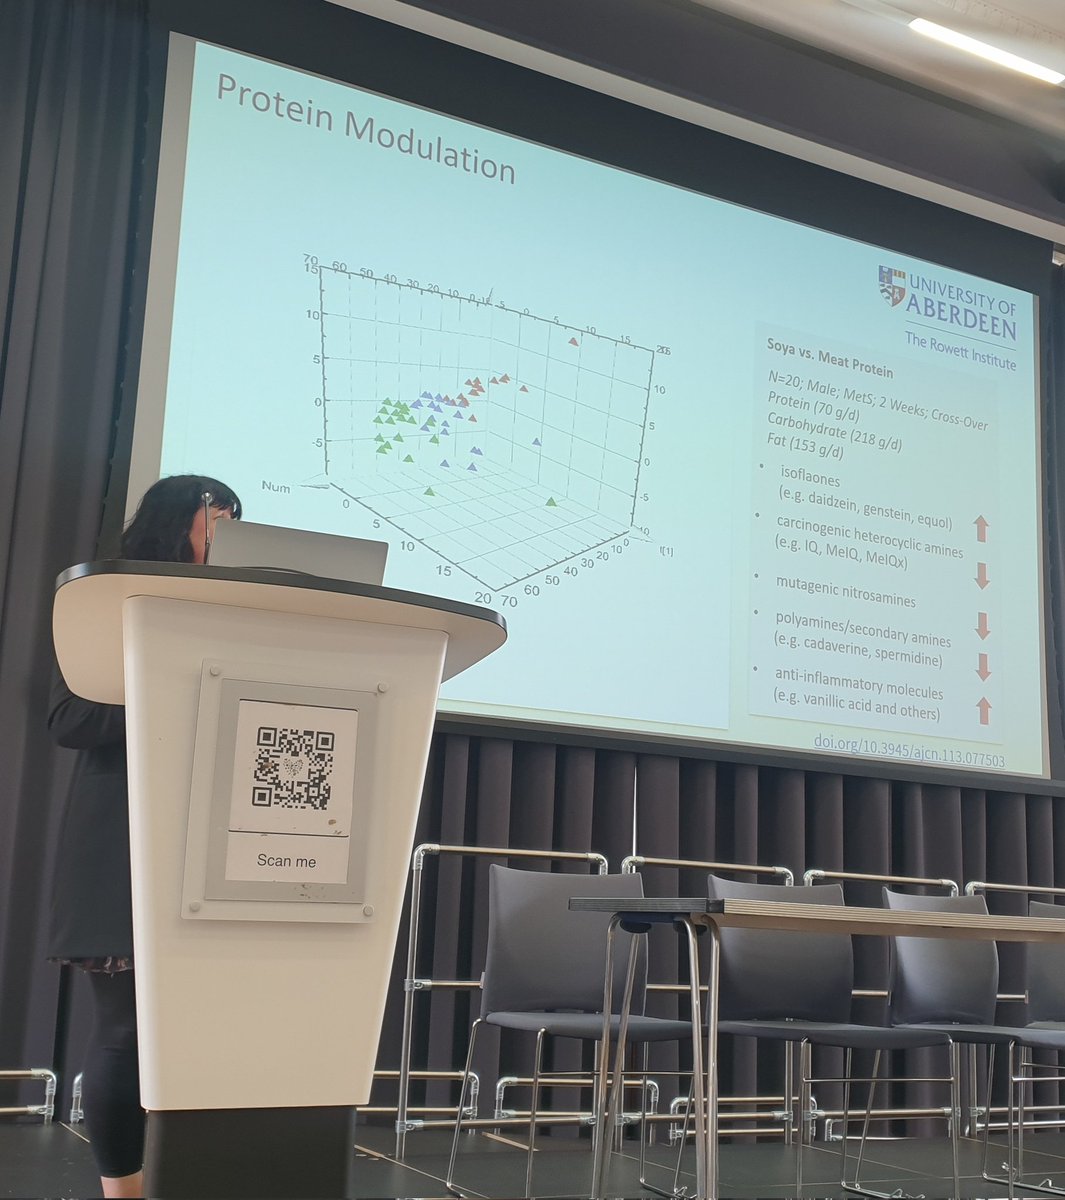 #phytochemical and health SIG - @NatProdChem Prof Wendy Russell speaks about microbiota-directed diets - proteins and fibre modulation, metabolites and bioactives profiles